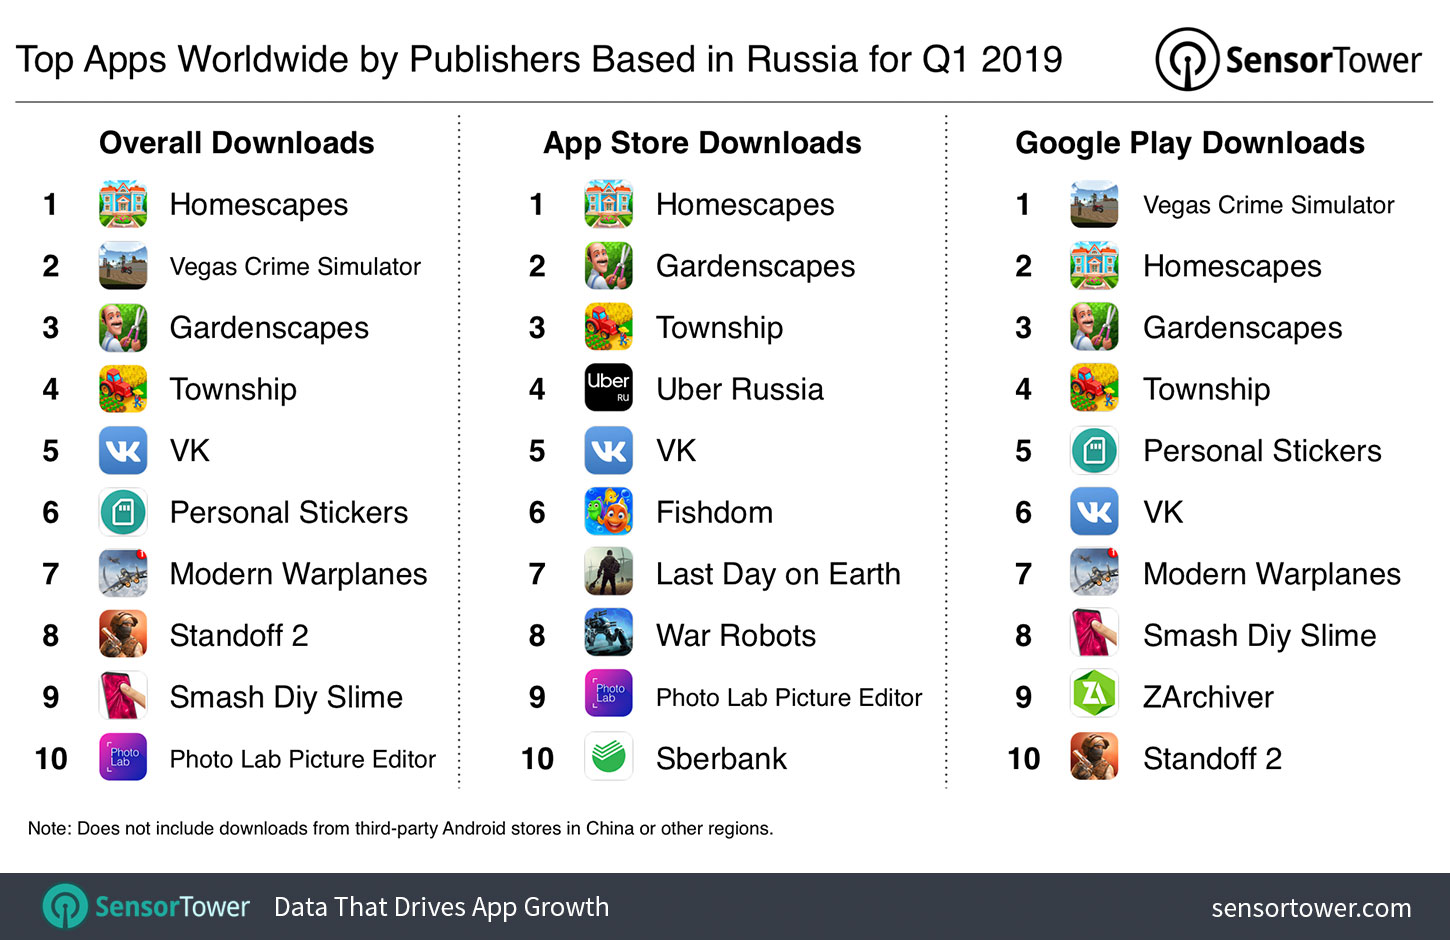 Top Apps Worldwide by Publishers based in Russia for Q1 2019